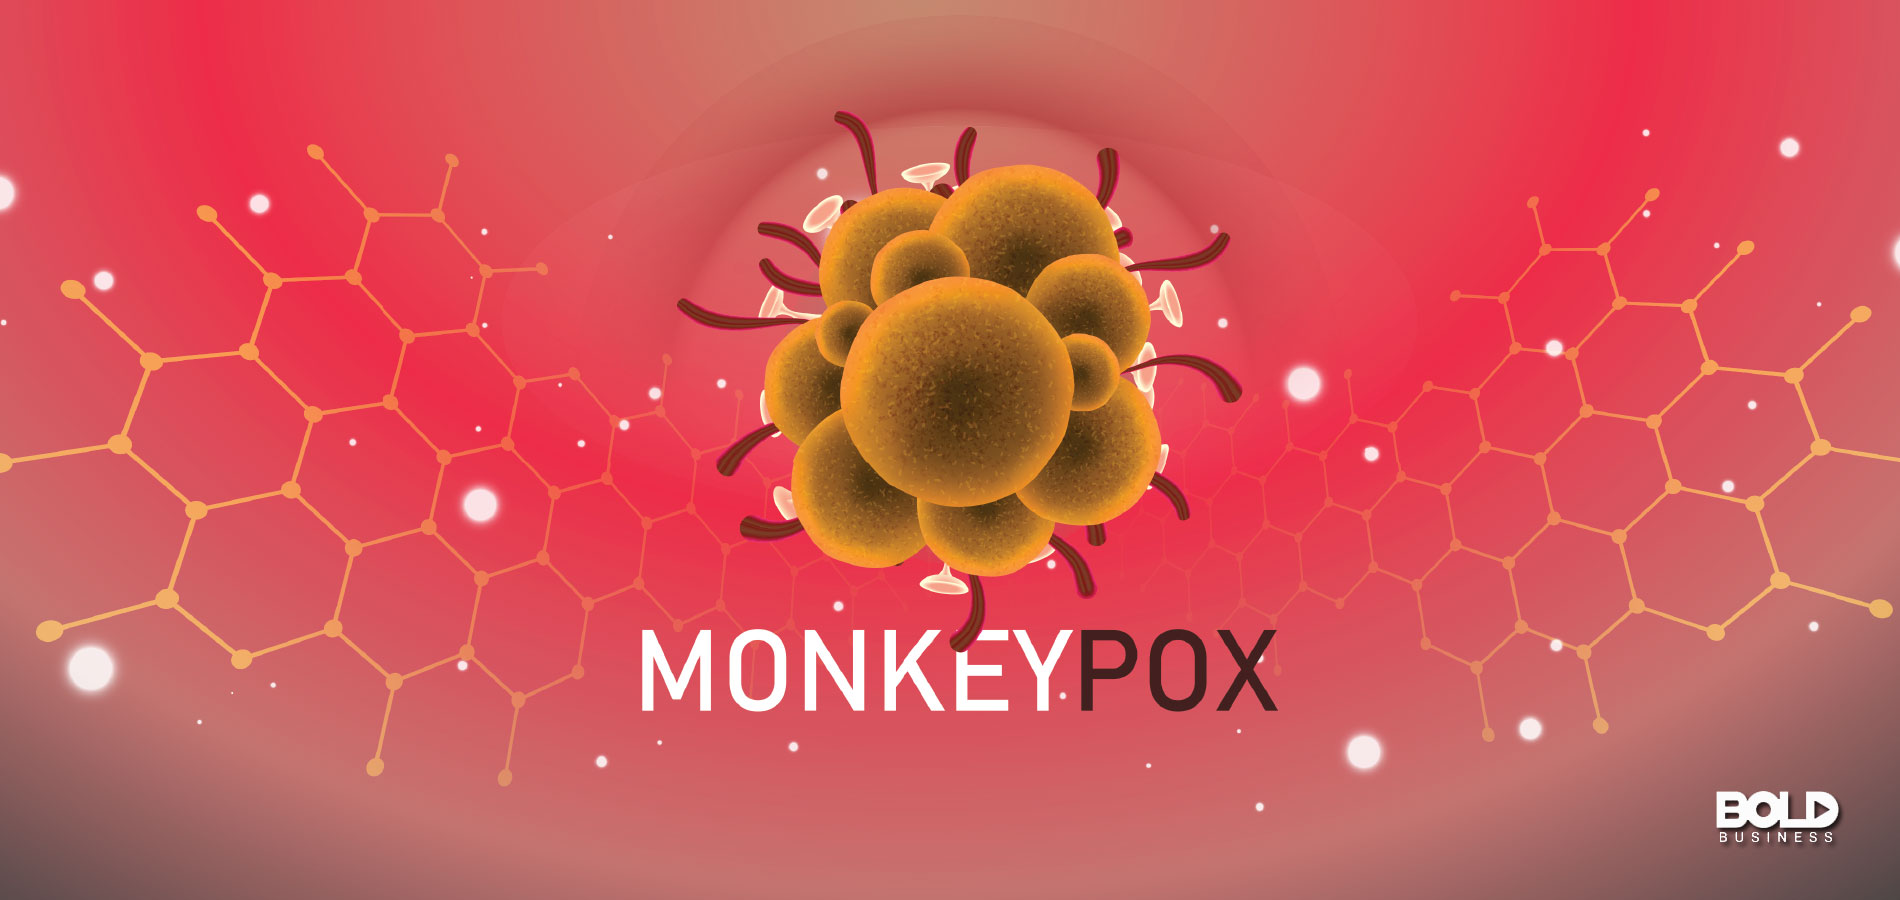 a monkeypox virus just hanging out